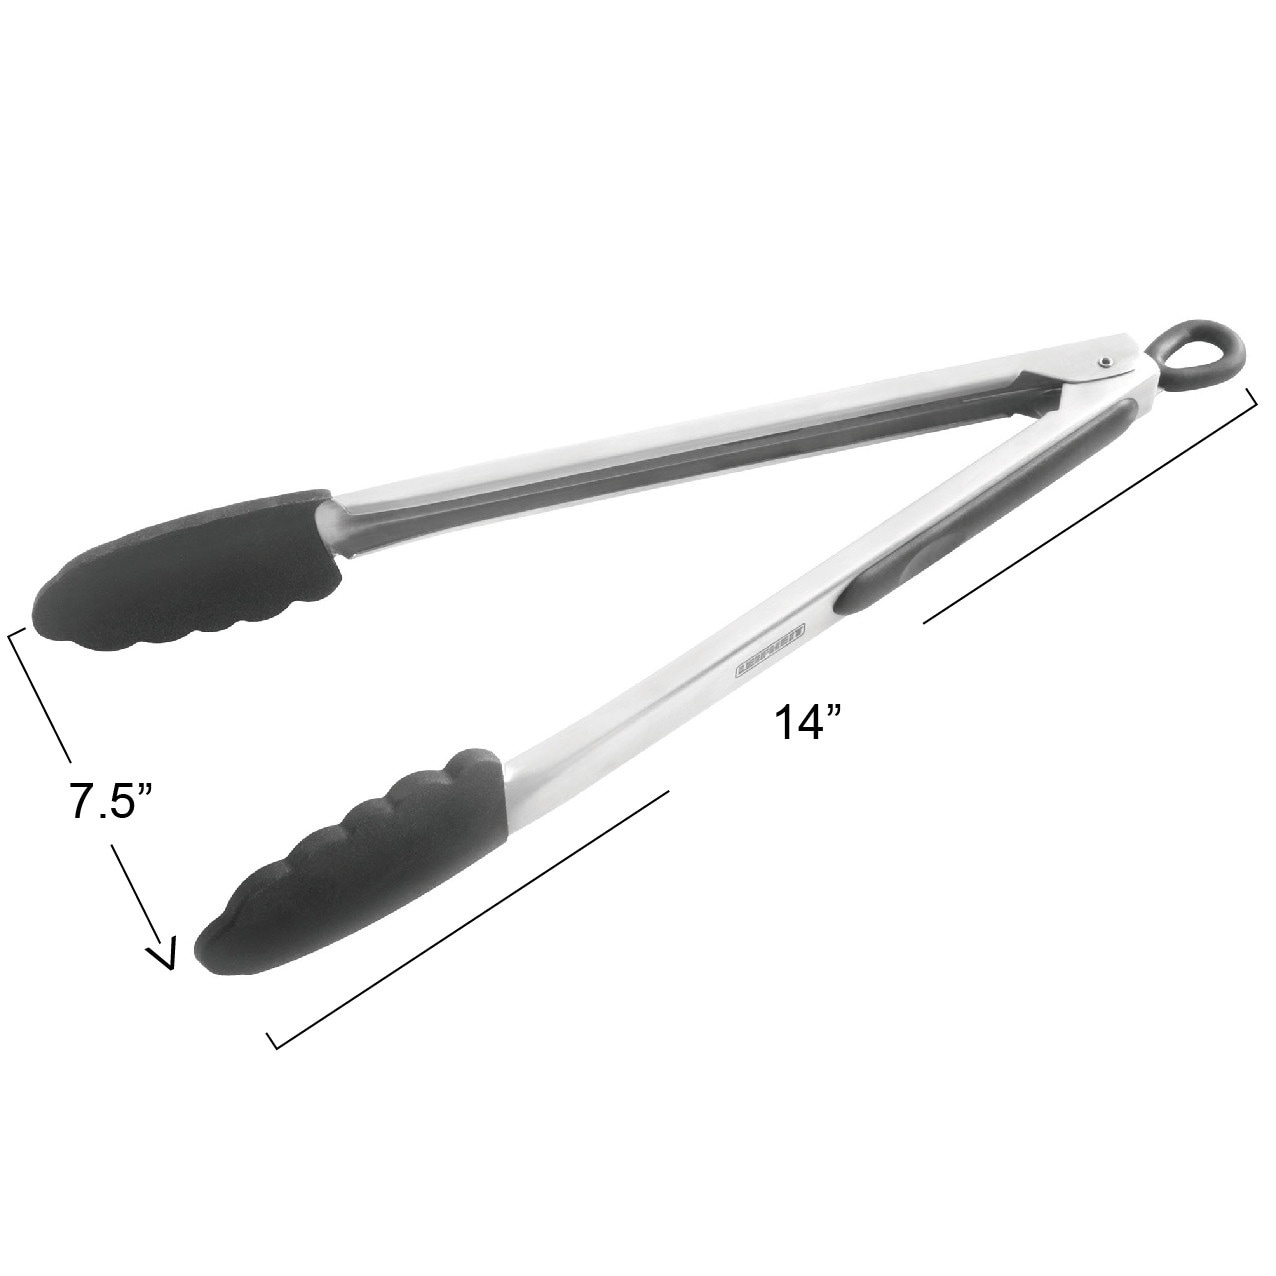 Farberware Stainless Steel Mini Locking Tongs with Silicone Tips